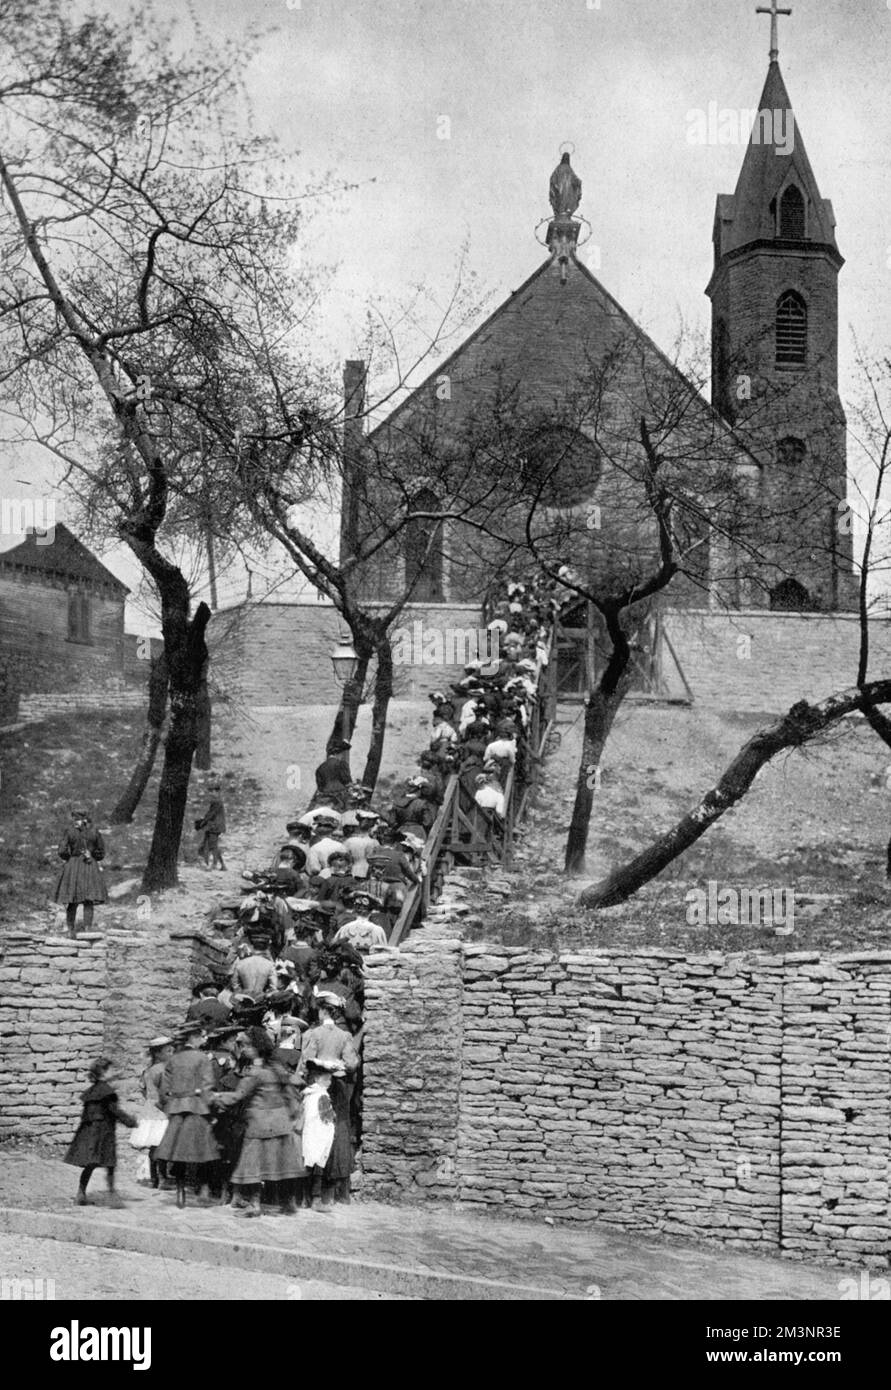 The annual pilgrimage to the Church of the Immaculate Conception, Cincinnati showing pilgims ascending the many steps up to the church.  he Immaculata Church has served since 1860 as a pilgrimage church, where on Good Friday the faithful ascend 85 steps to the church's front door from the neighborhood below while praying the Rosary. An additional 65 steps start at the base of Mt. Adams, with a pedestrian bridge over Columbia Parkway connecting the two paths. The steps were originally made of wood, but in 1911, the City of Cincinnati helped the church build concrete steps.     Date: 1909 Stock Photo